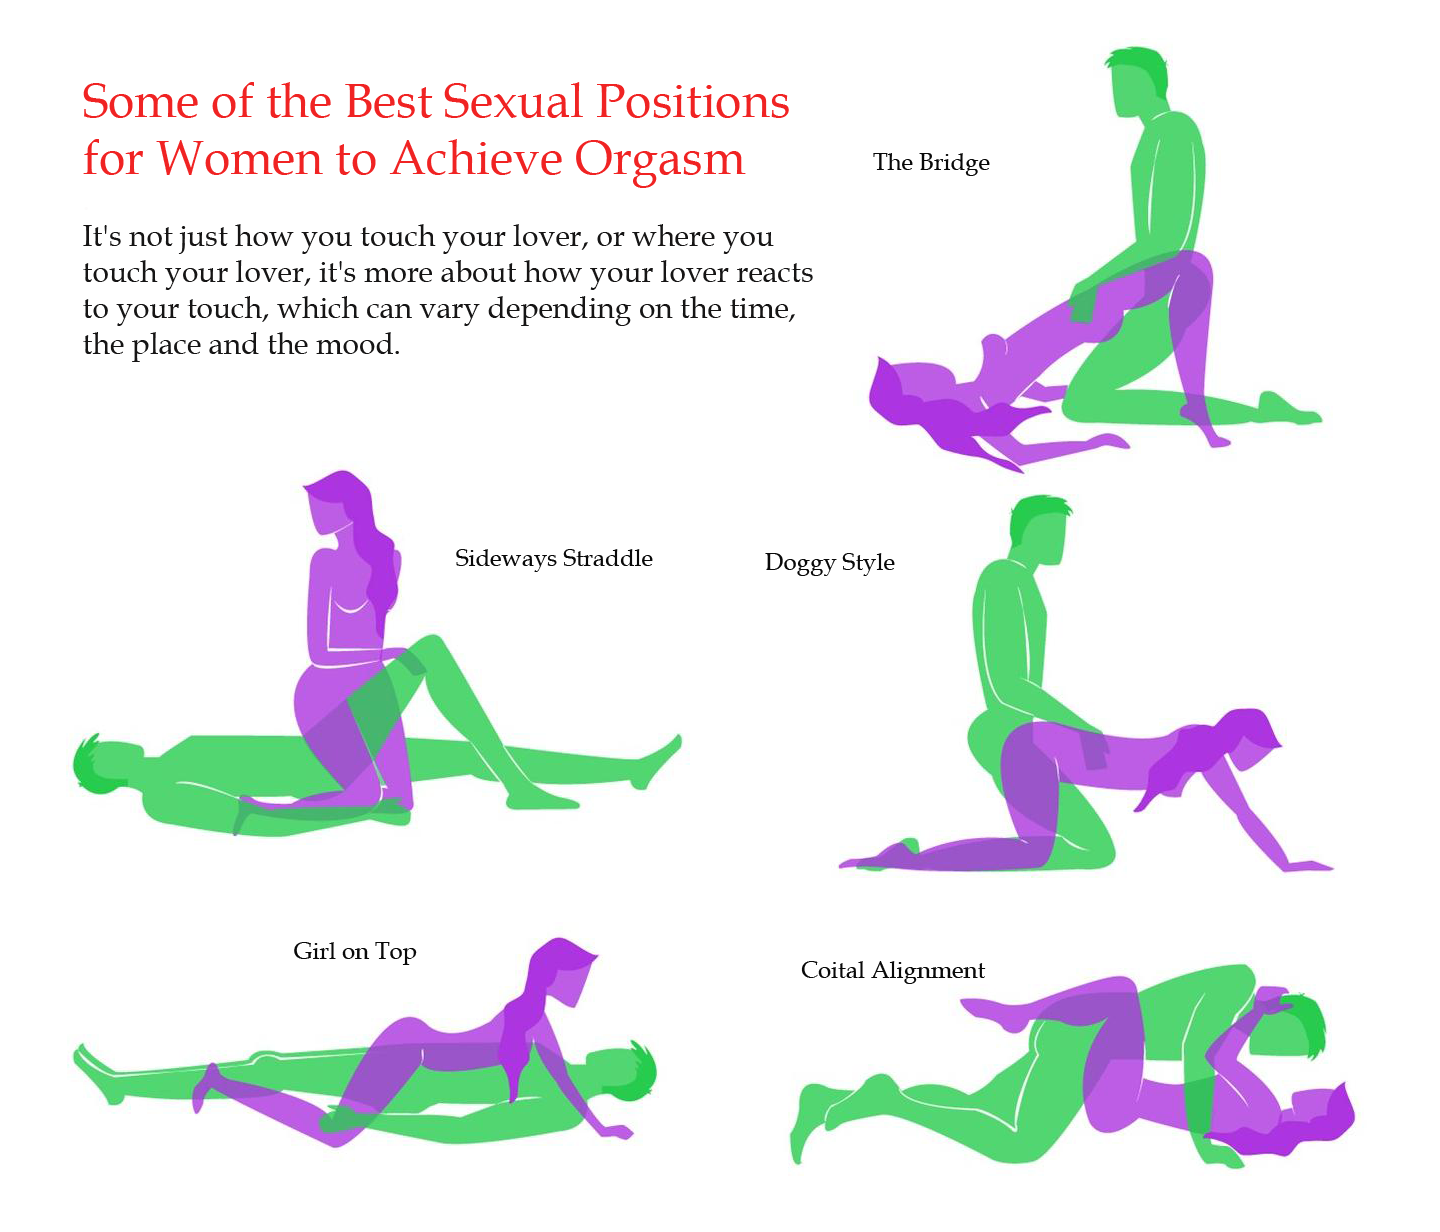 What is the most common sex position